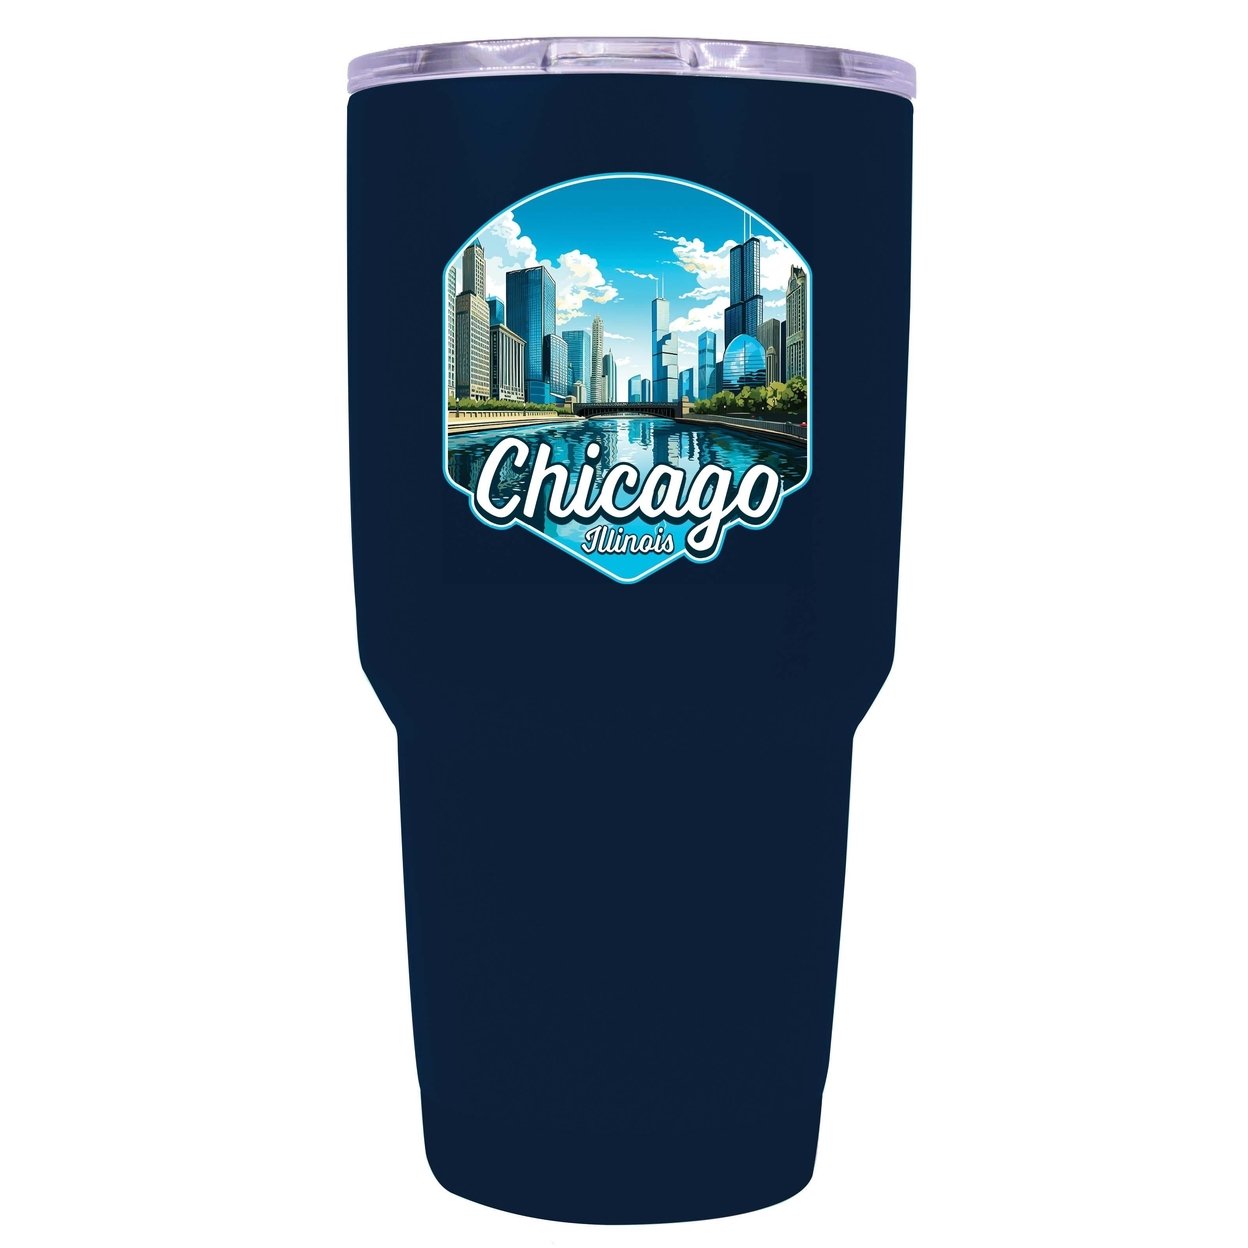 Chicago Illinois A Souvenir 24 Oz Insulated Tumbler - Rose Gold,,2-Pack